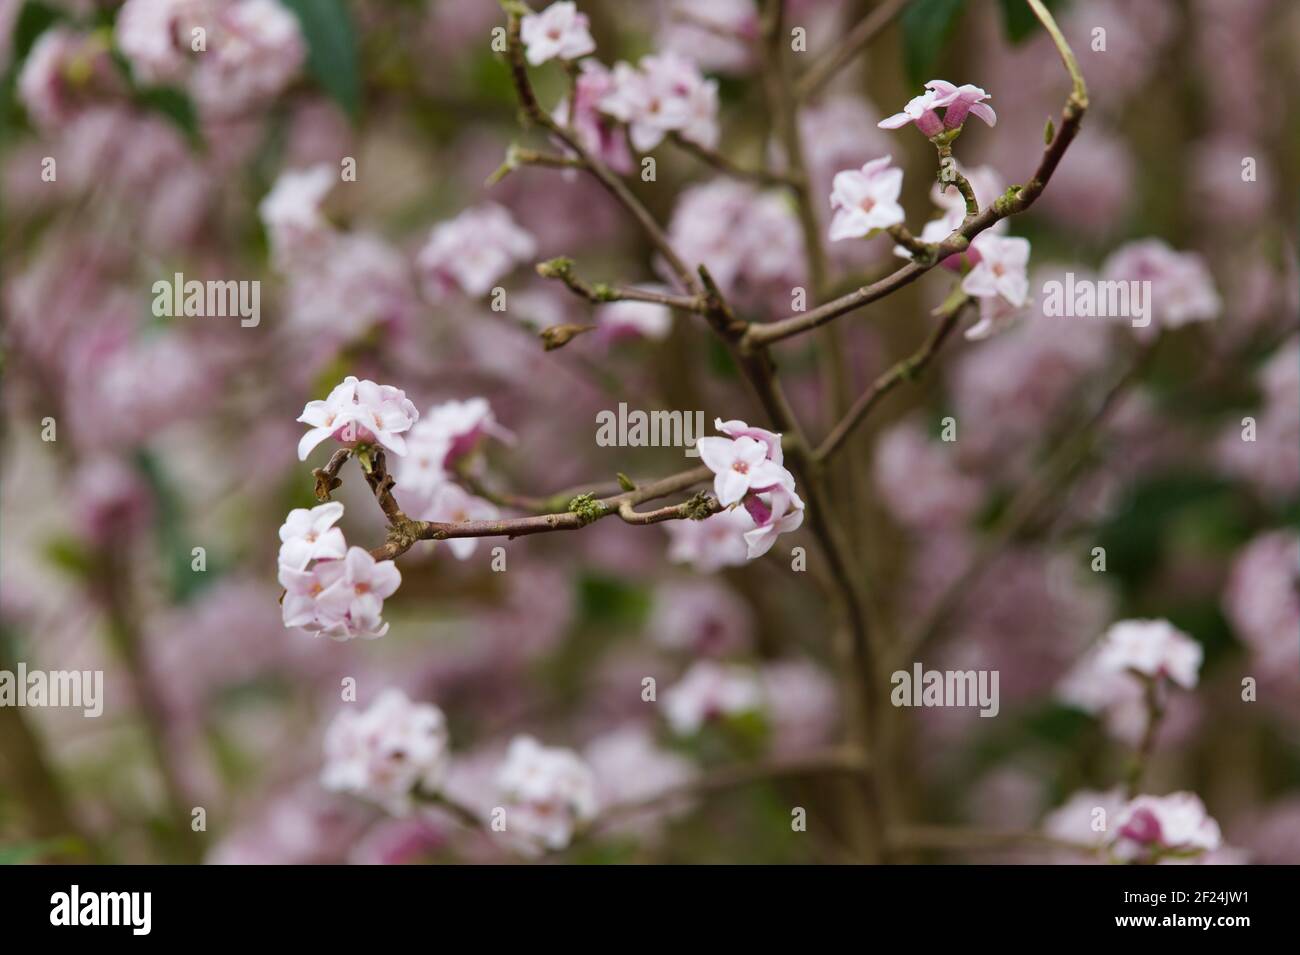 Soft focus view of pink spring blooms of a Nepalese paper plant / Daphne bholua Stock Photo